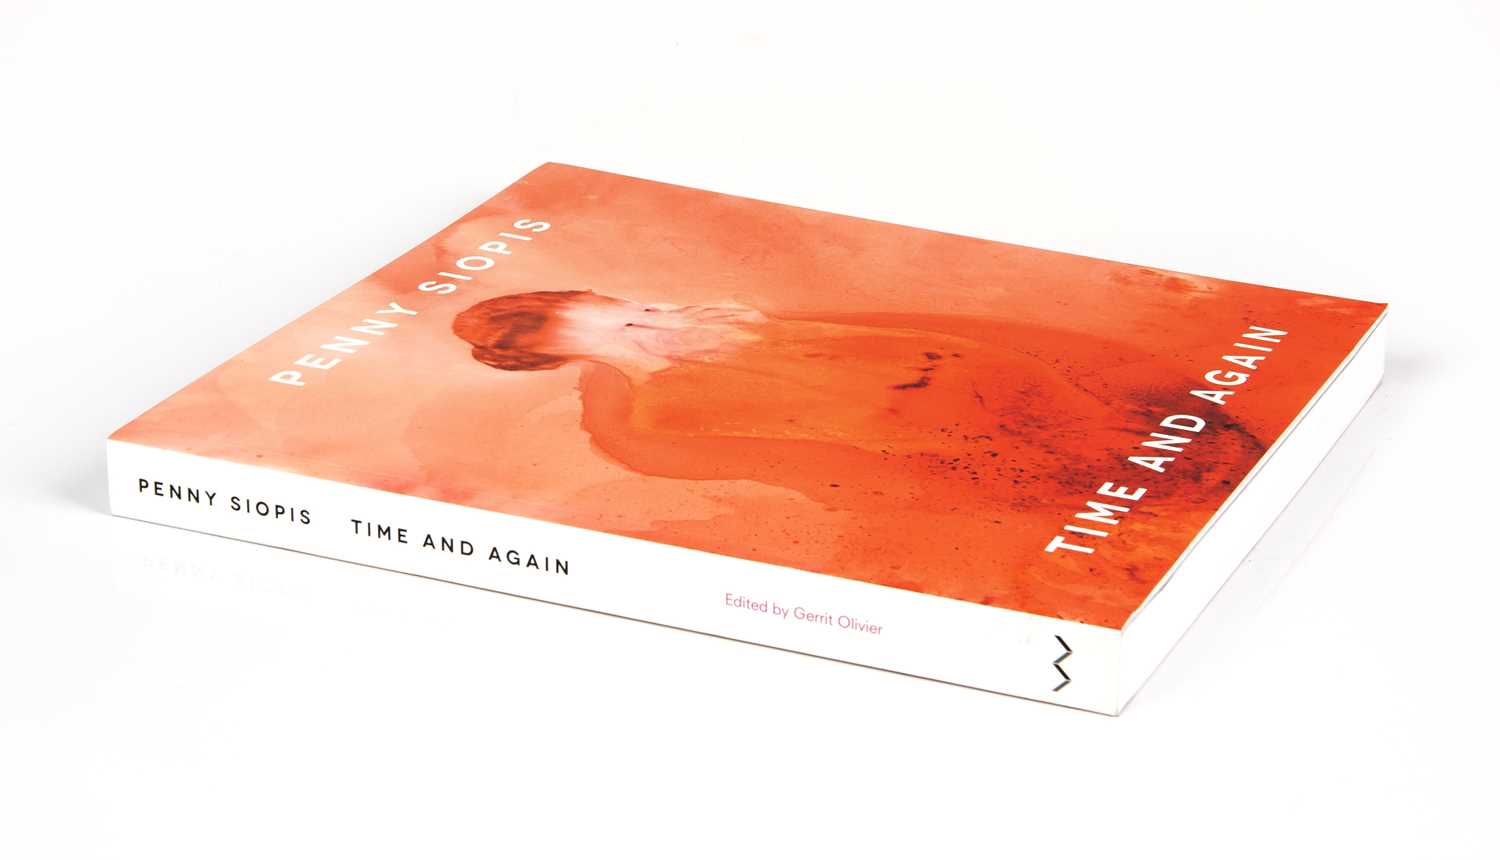 Lot 82 - Penny Siopis: Time and Again (2014) edited by Gerrit Olivier